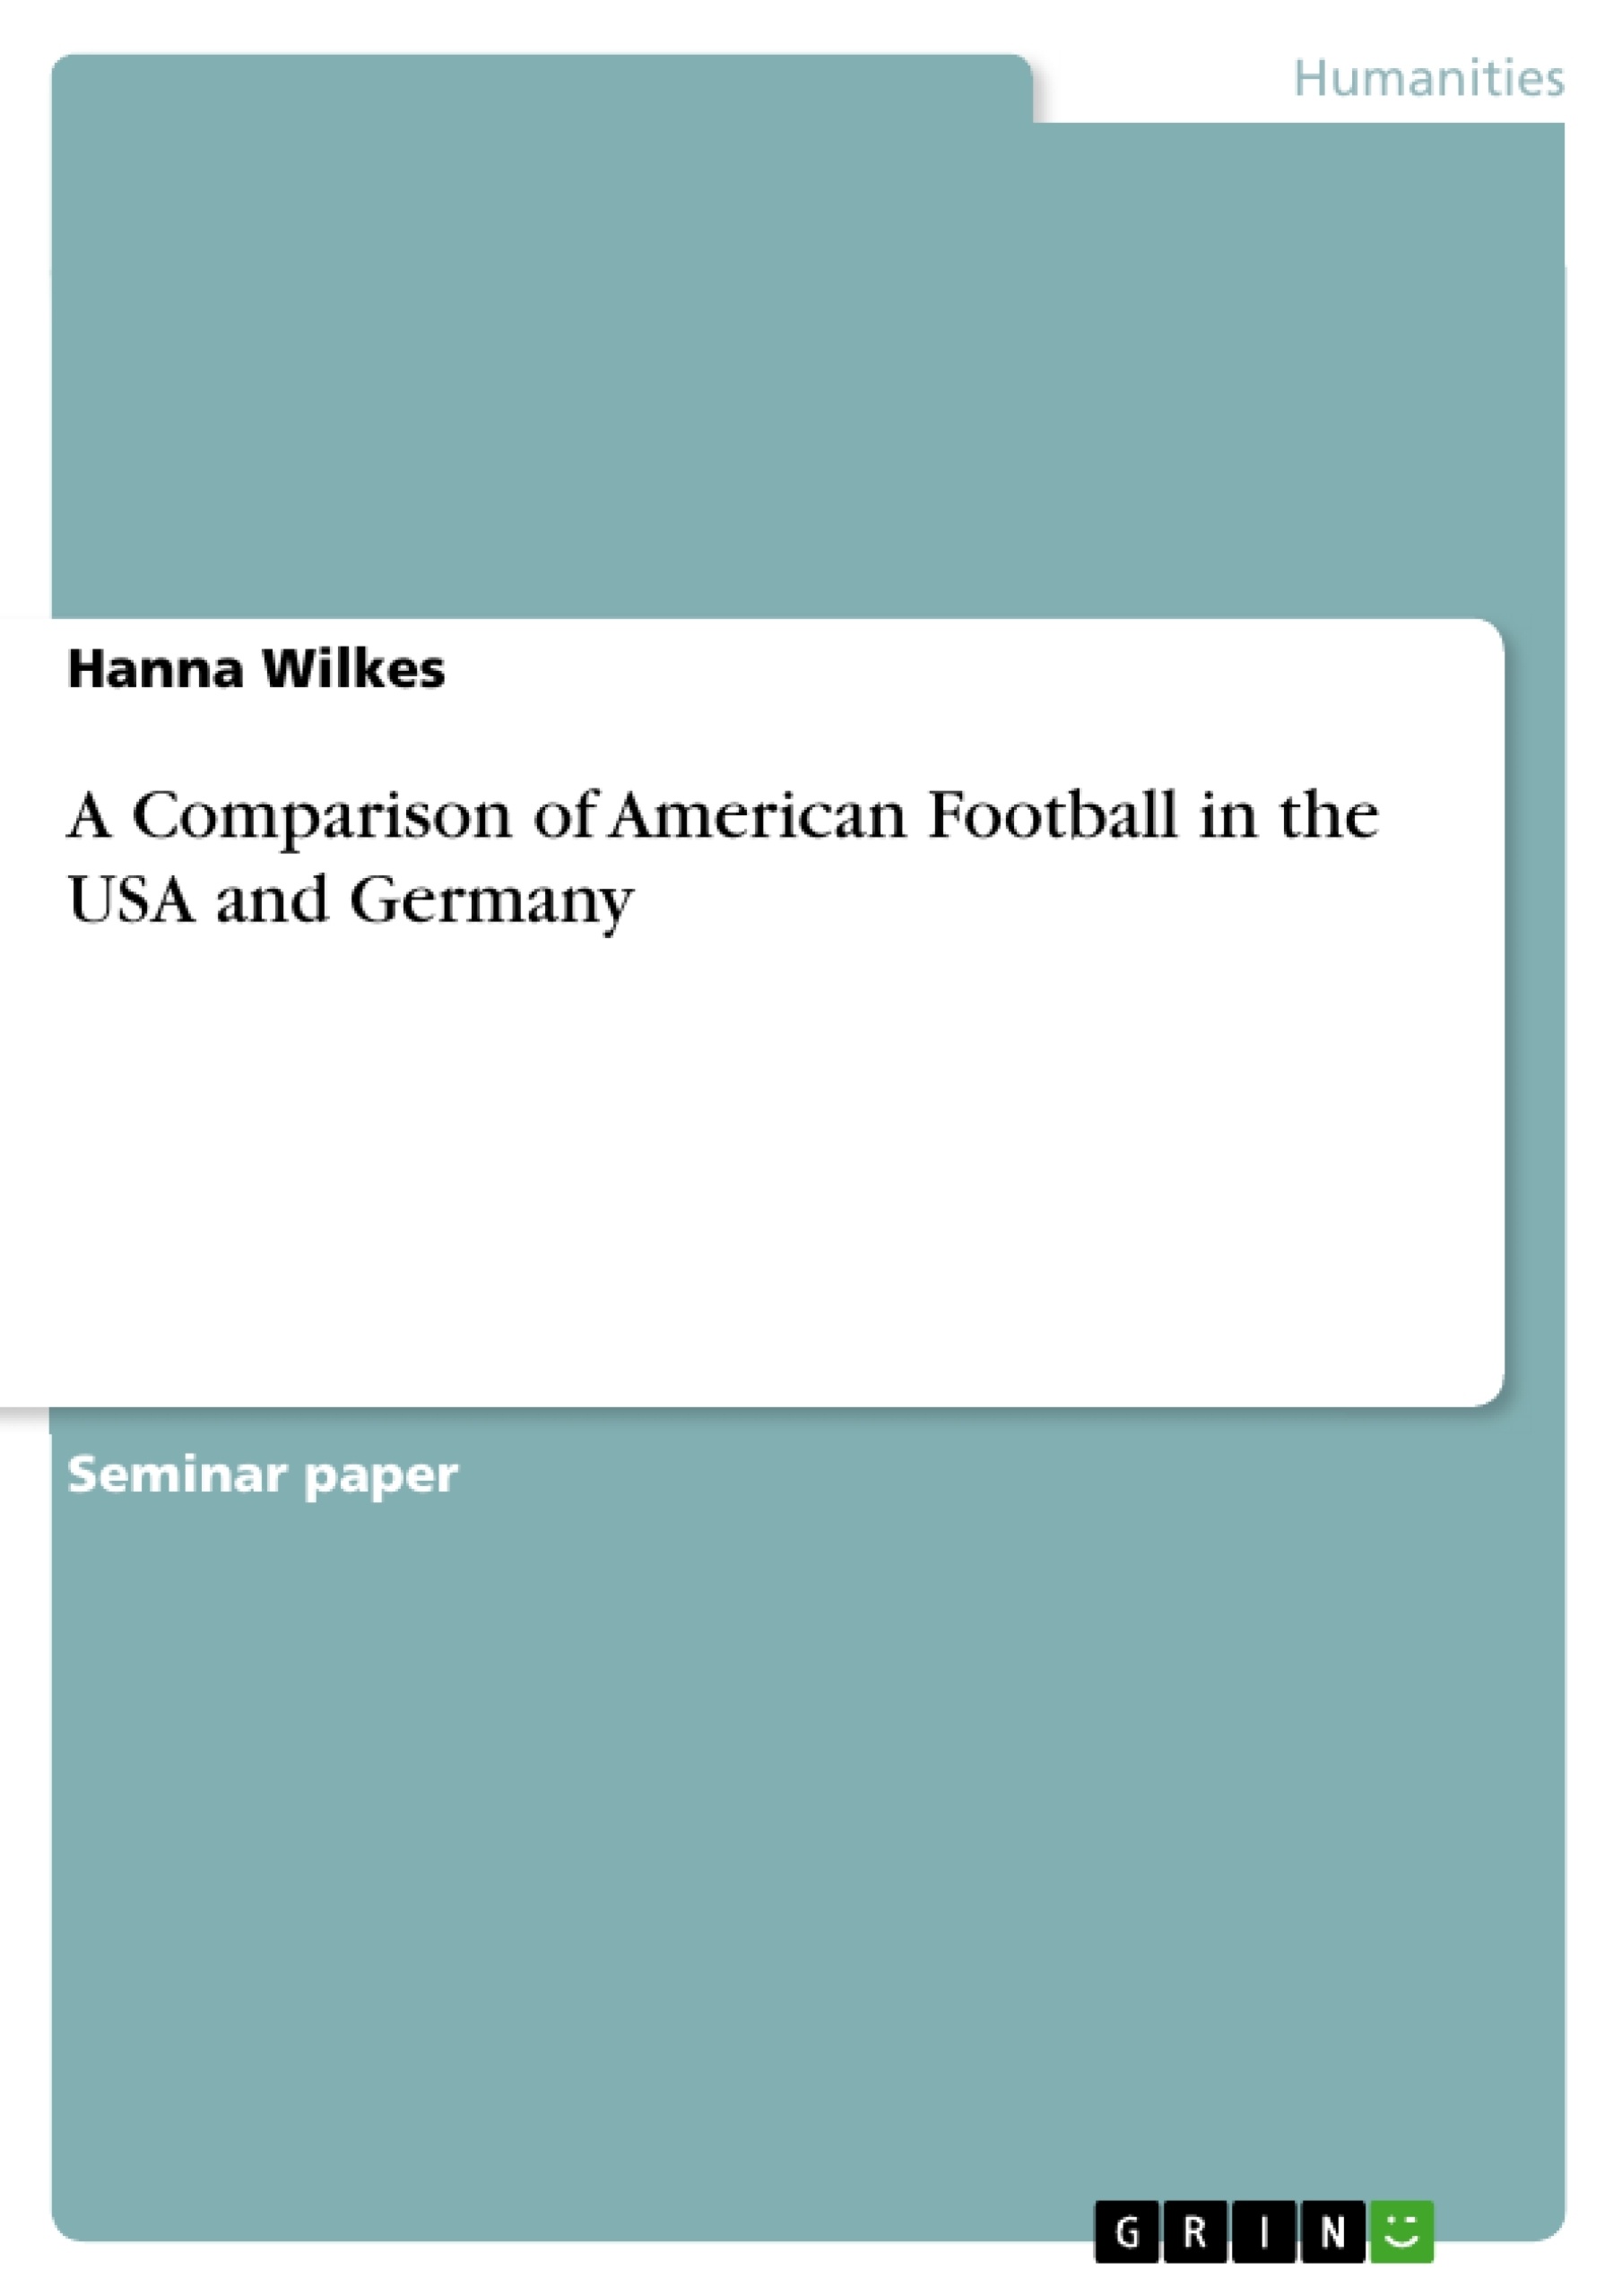 Title: A Comparison of American Football in the USA and Germany